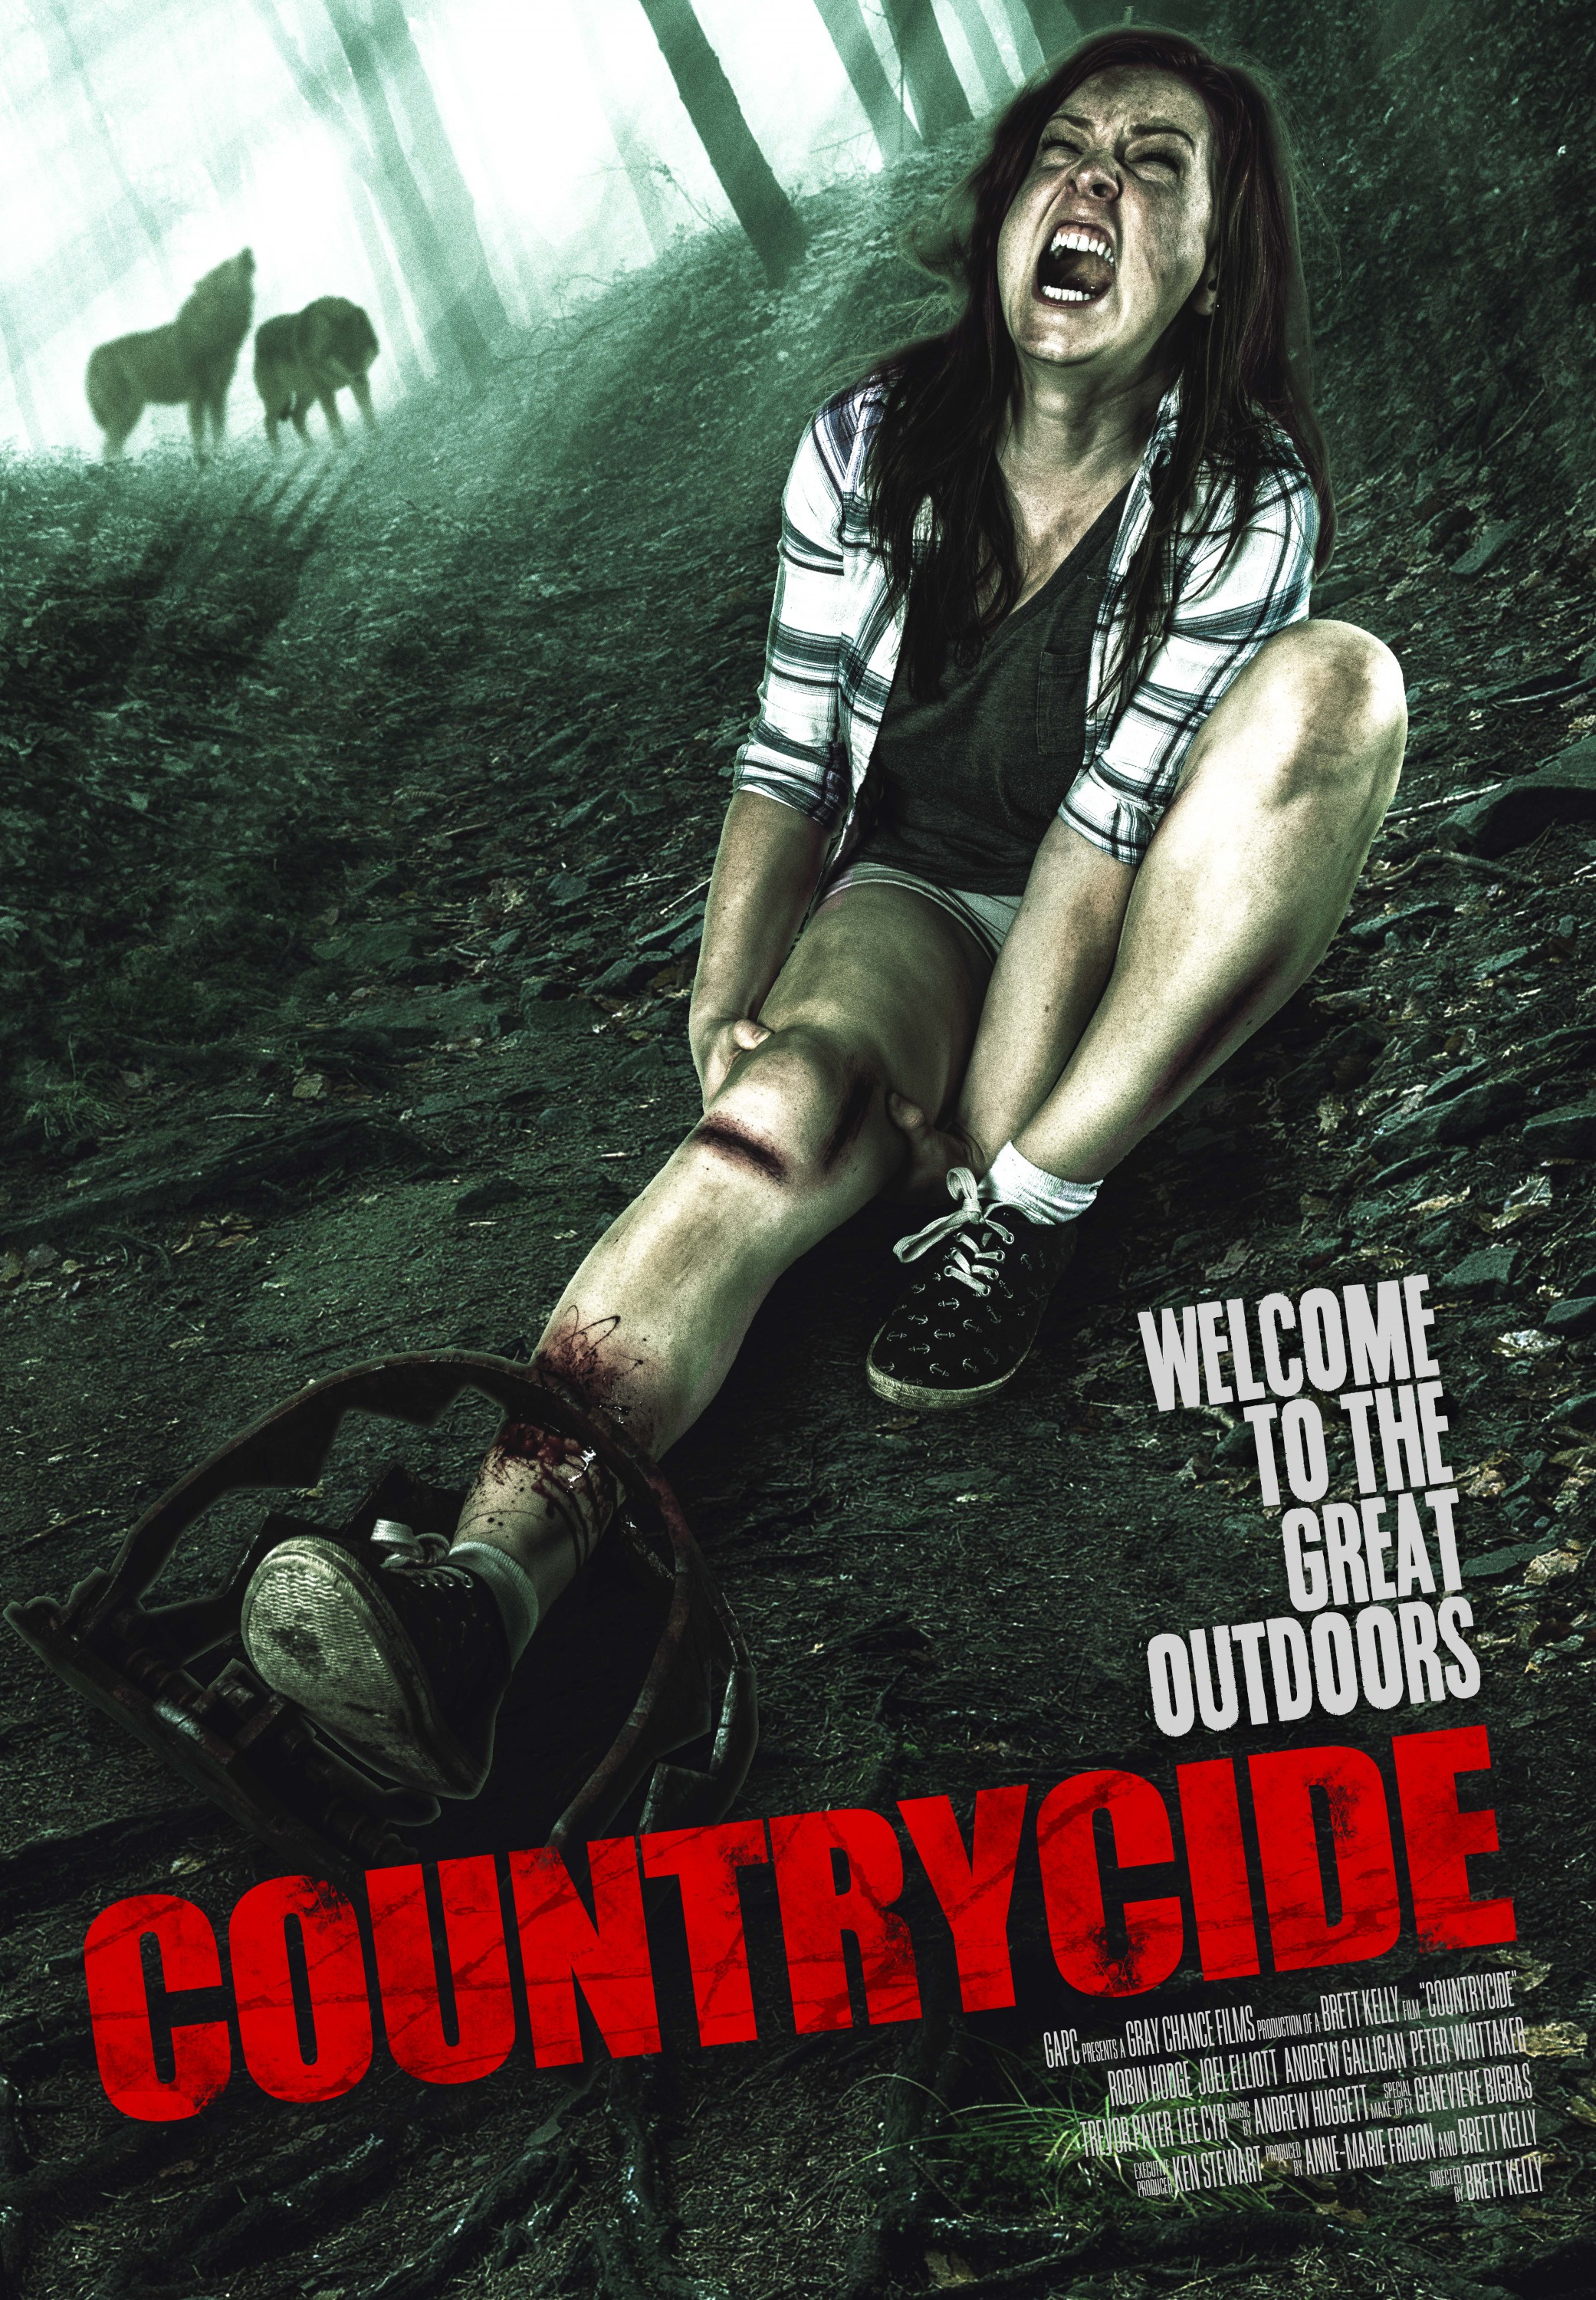 Mega Sized Movie Poster Image for Countrycide 